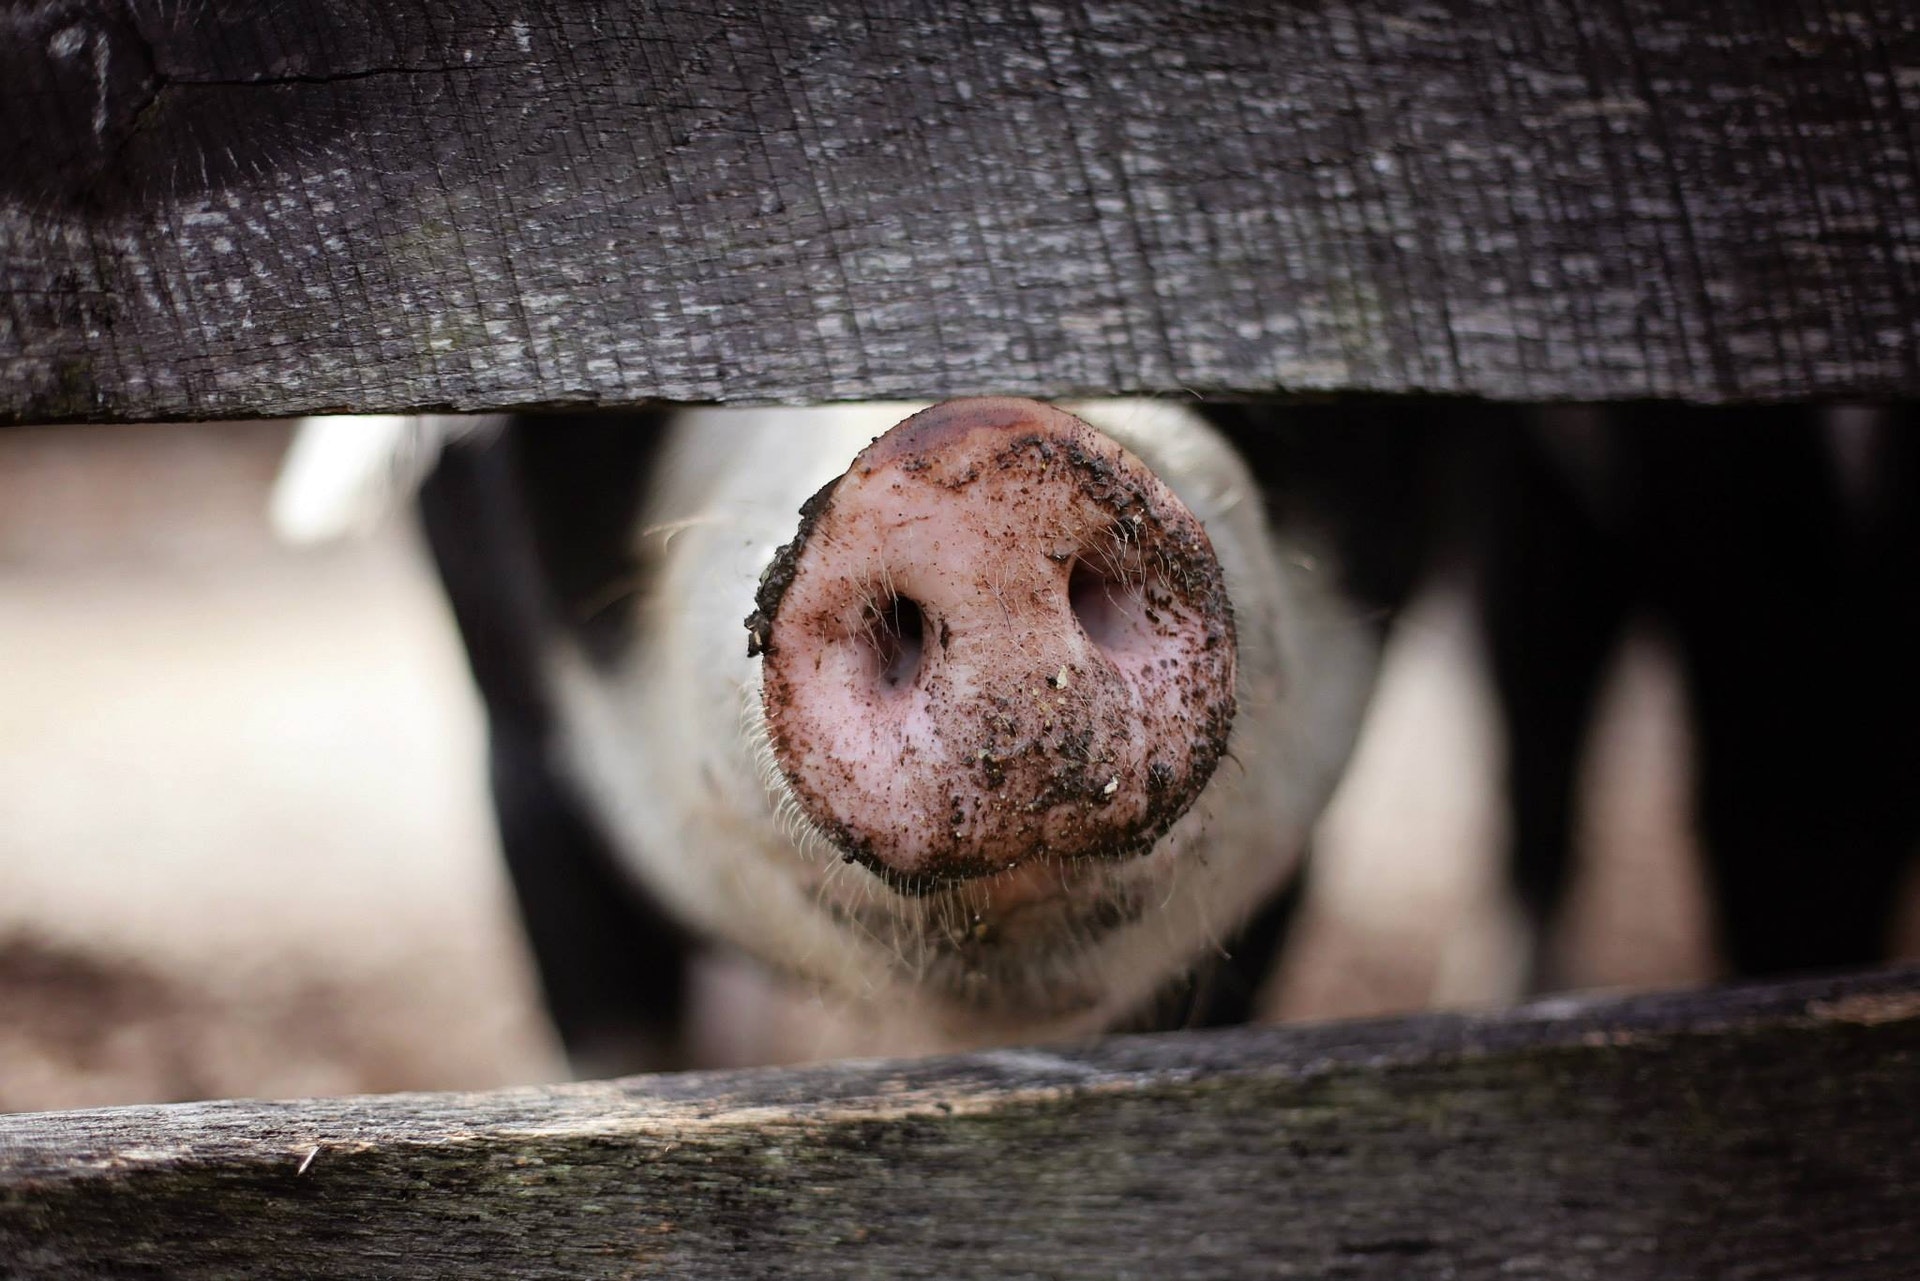 Pigs died after heart attacks. Scientists brought their cells back to life.